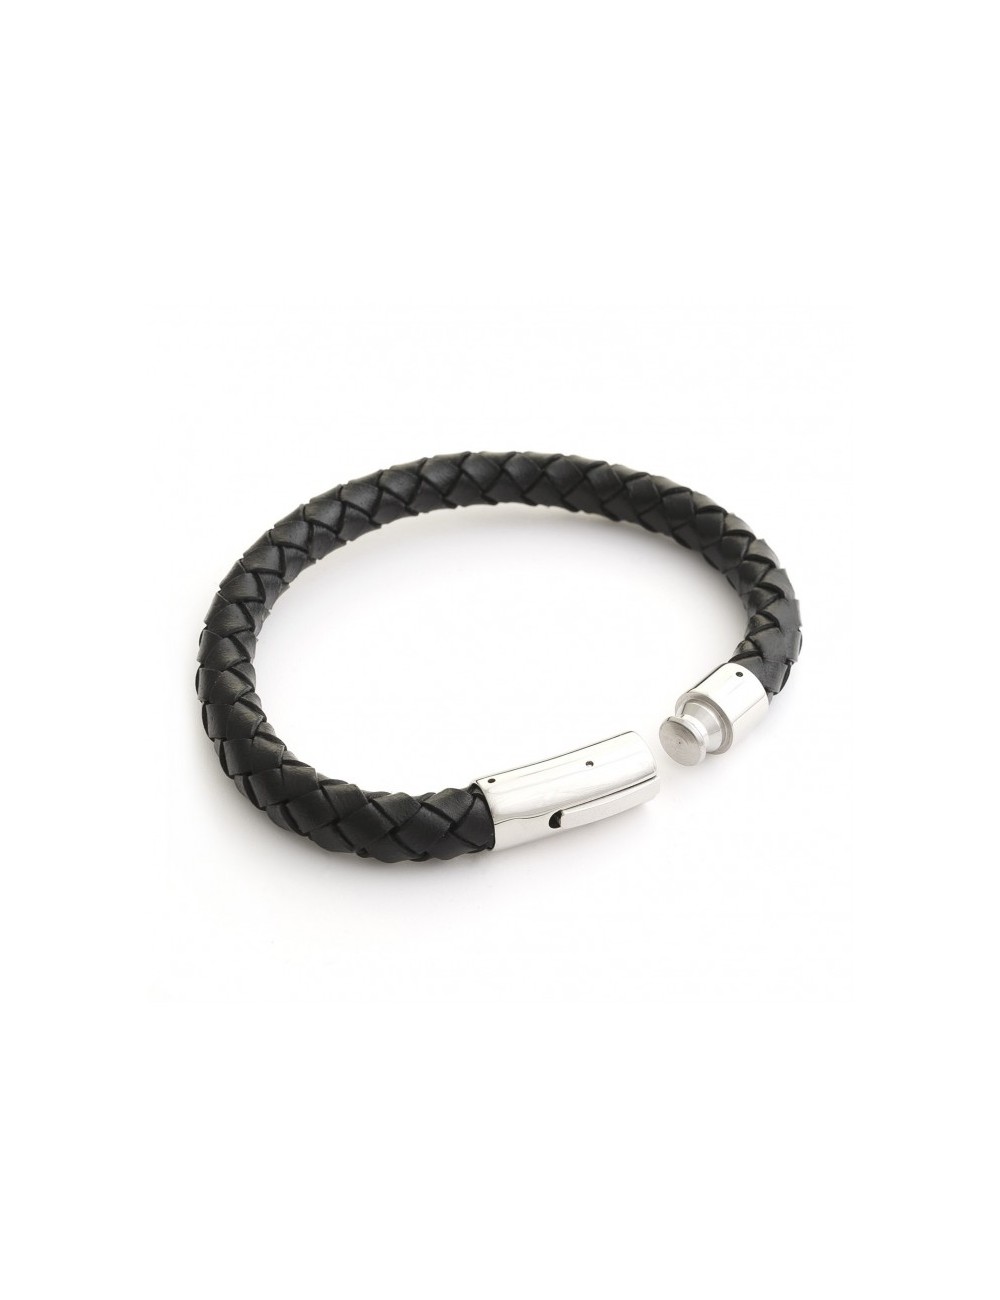 Leather bracelet and push button in stainless steel.